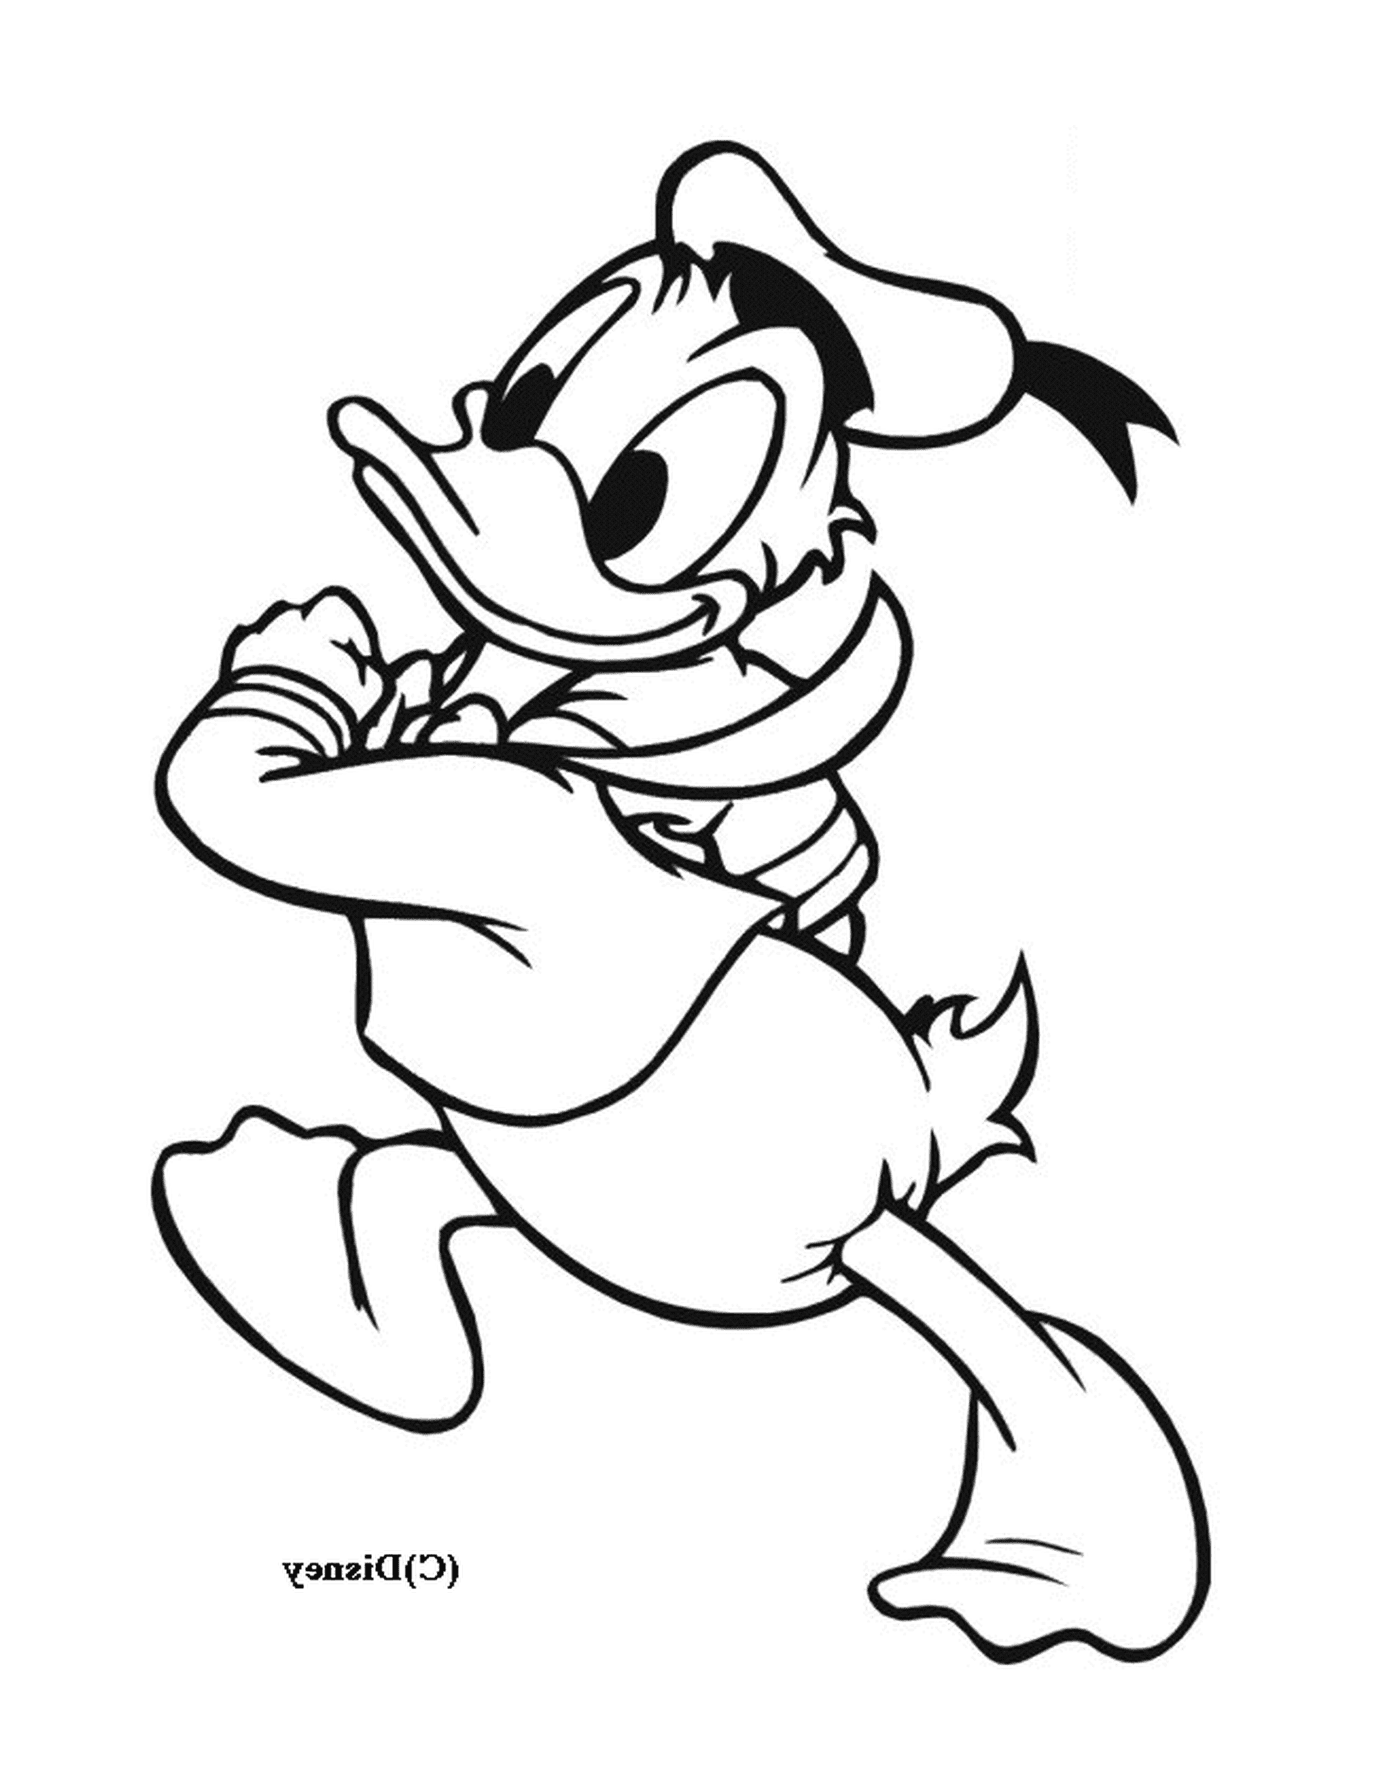  Donald Duck is running happily with a rope 